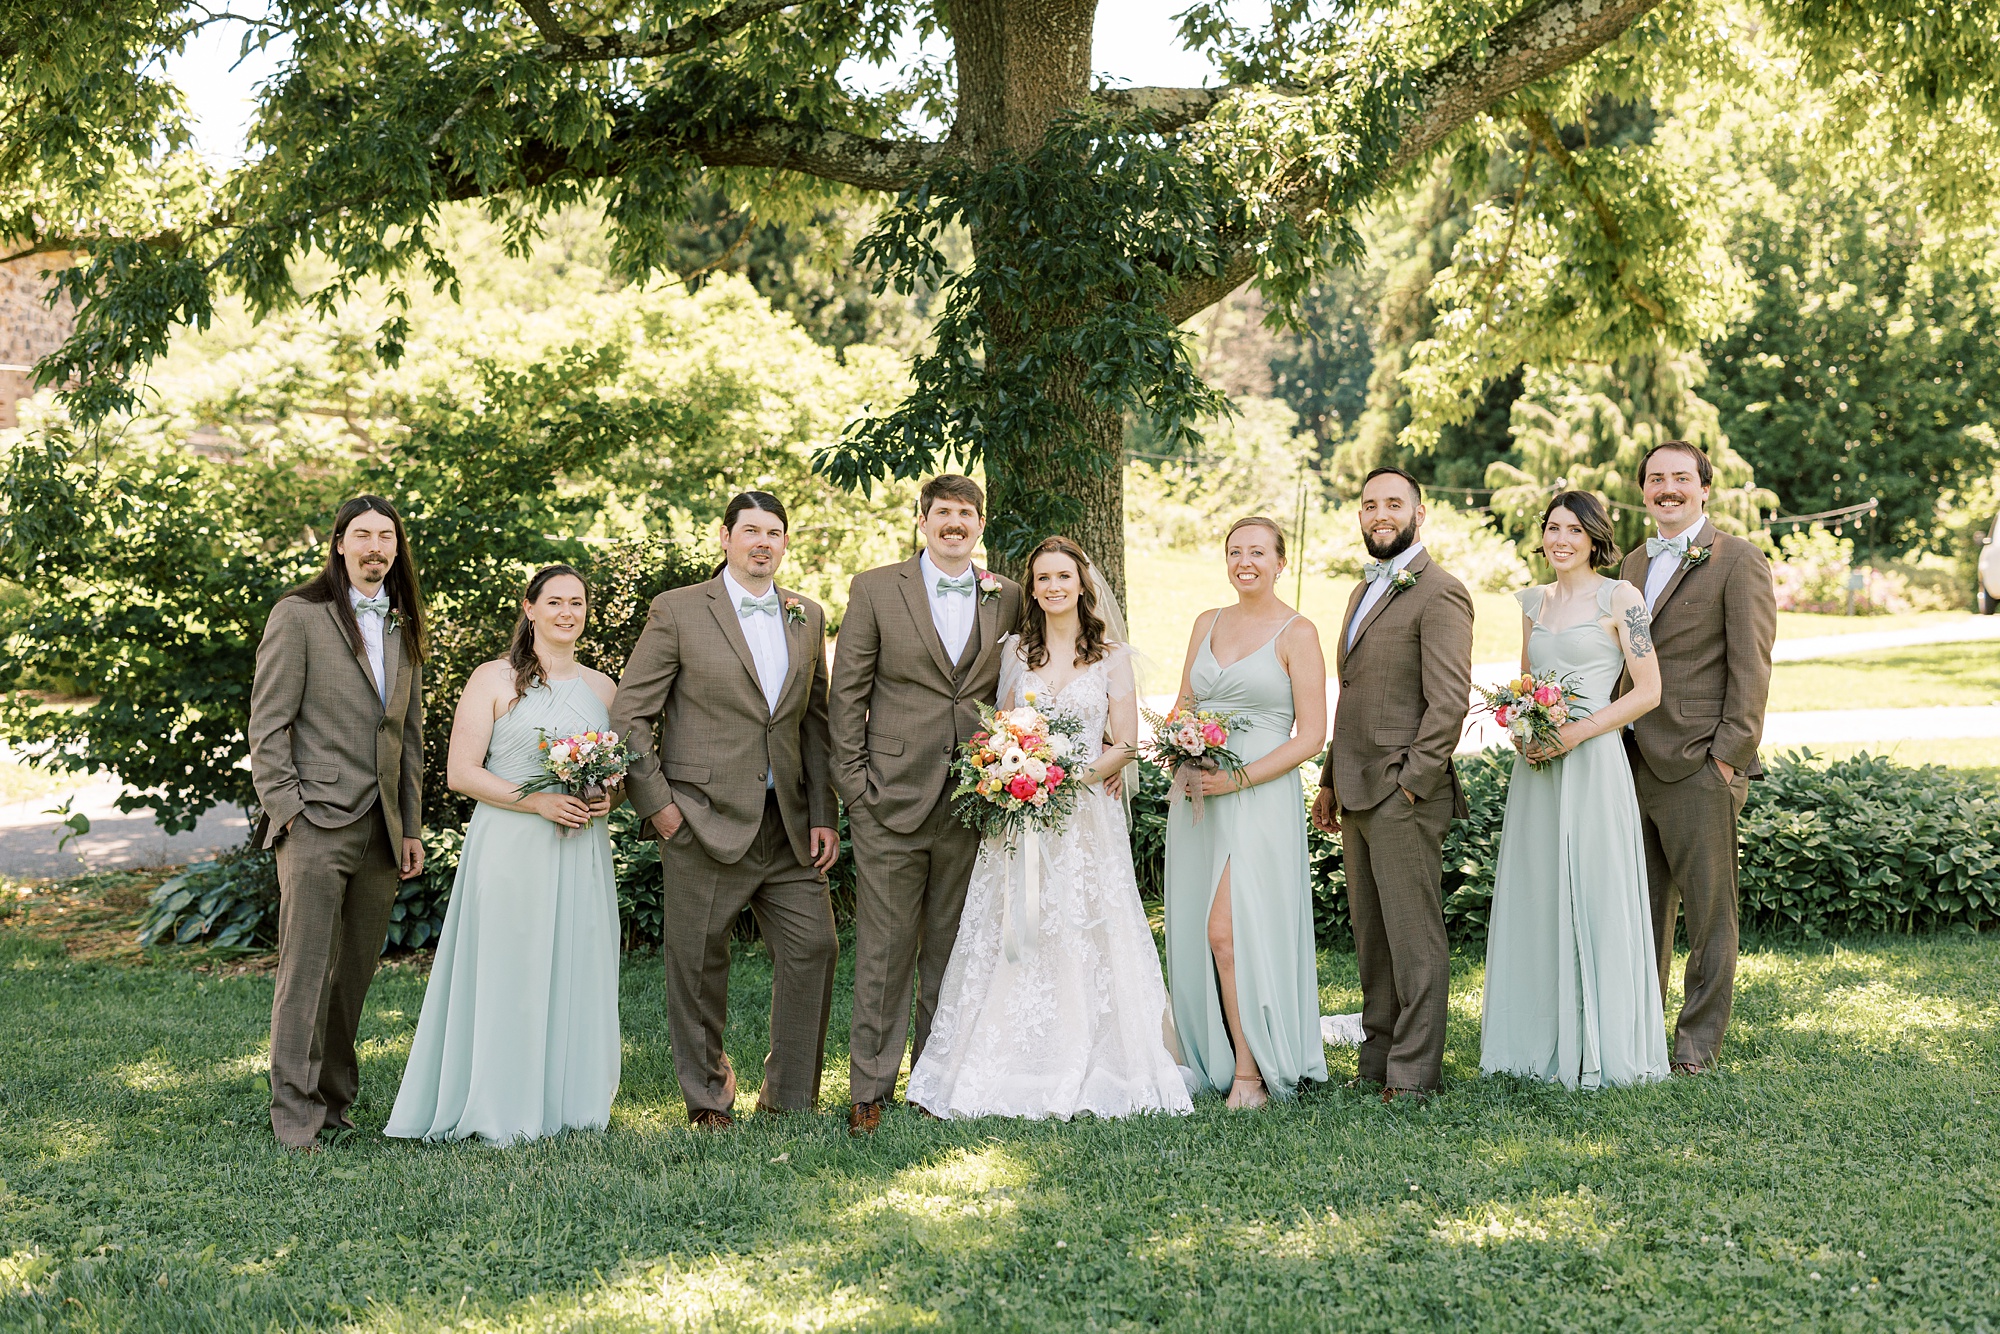 bride and groom stand with wedding party in tan and mint attire